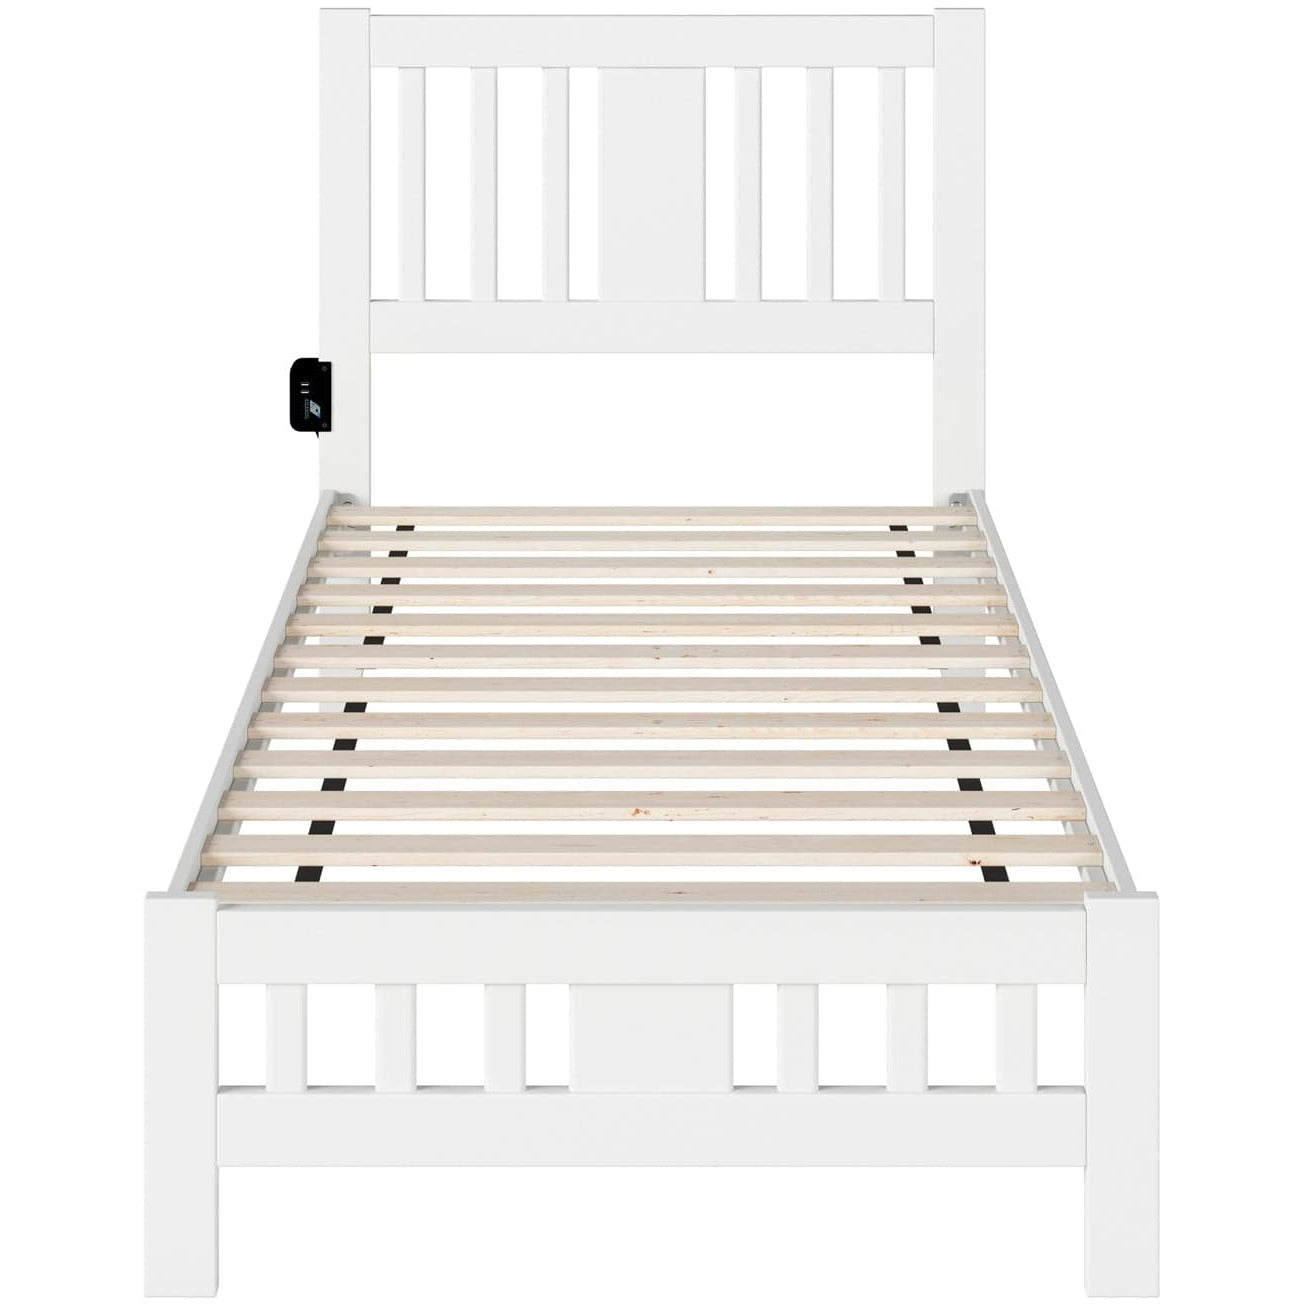 AFI Furnishings Tahoe Twin Bed with Footboard in White AG8960022